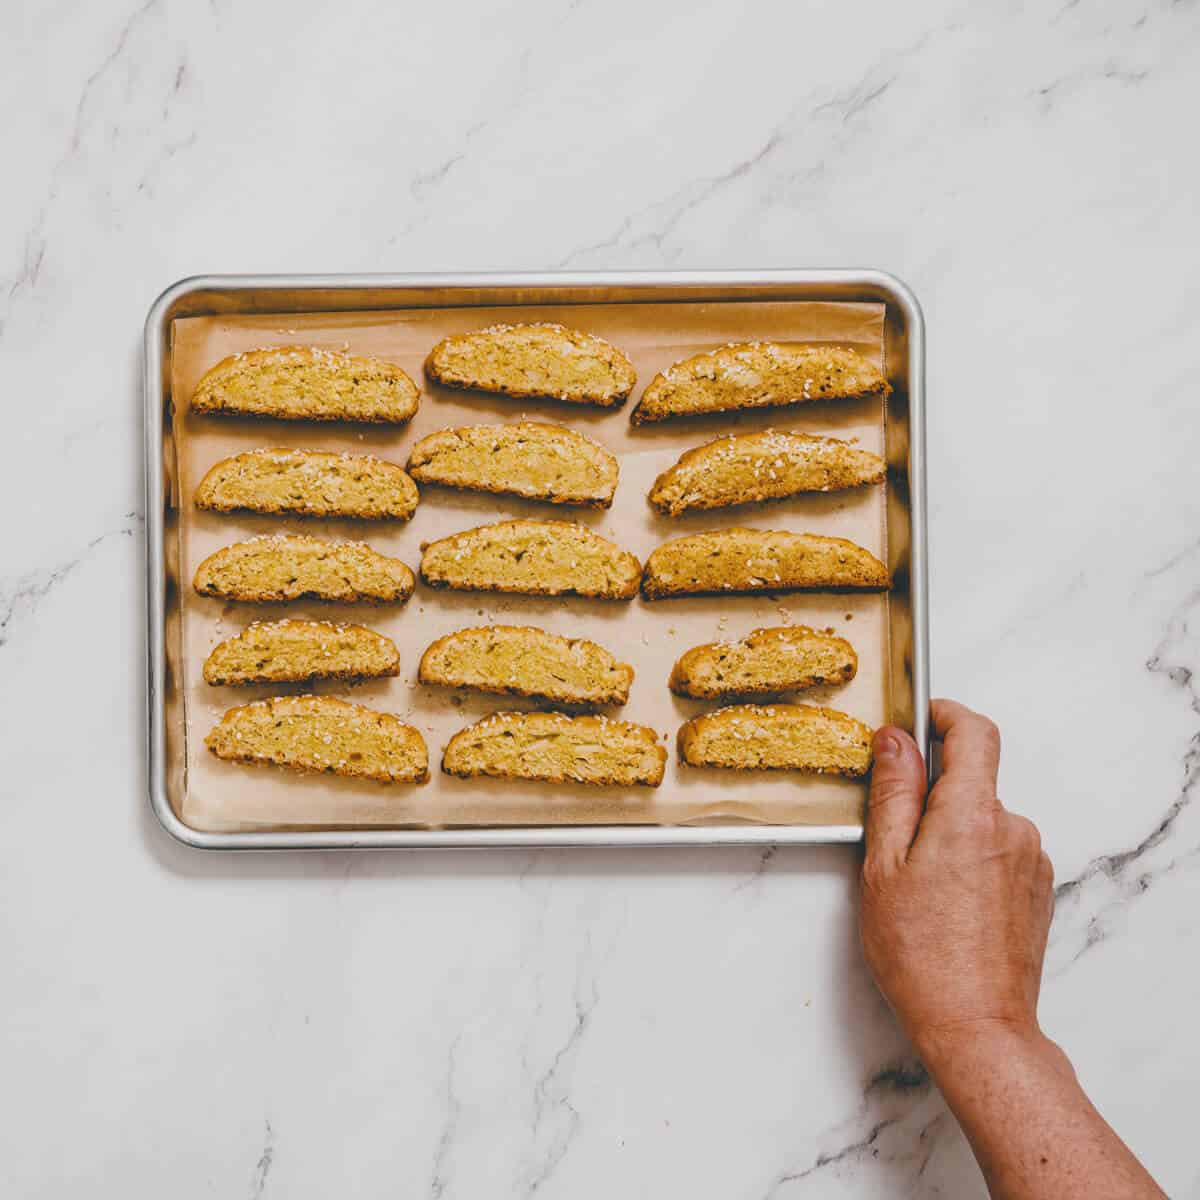 Greek biscotti being baked on a parchment lined baking tray.